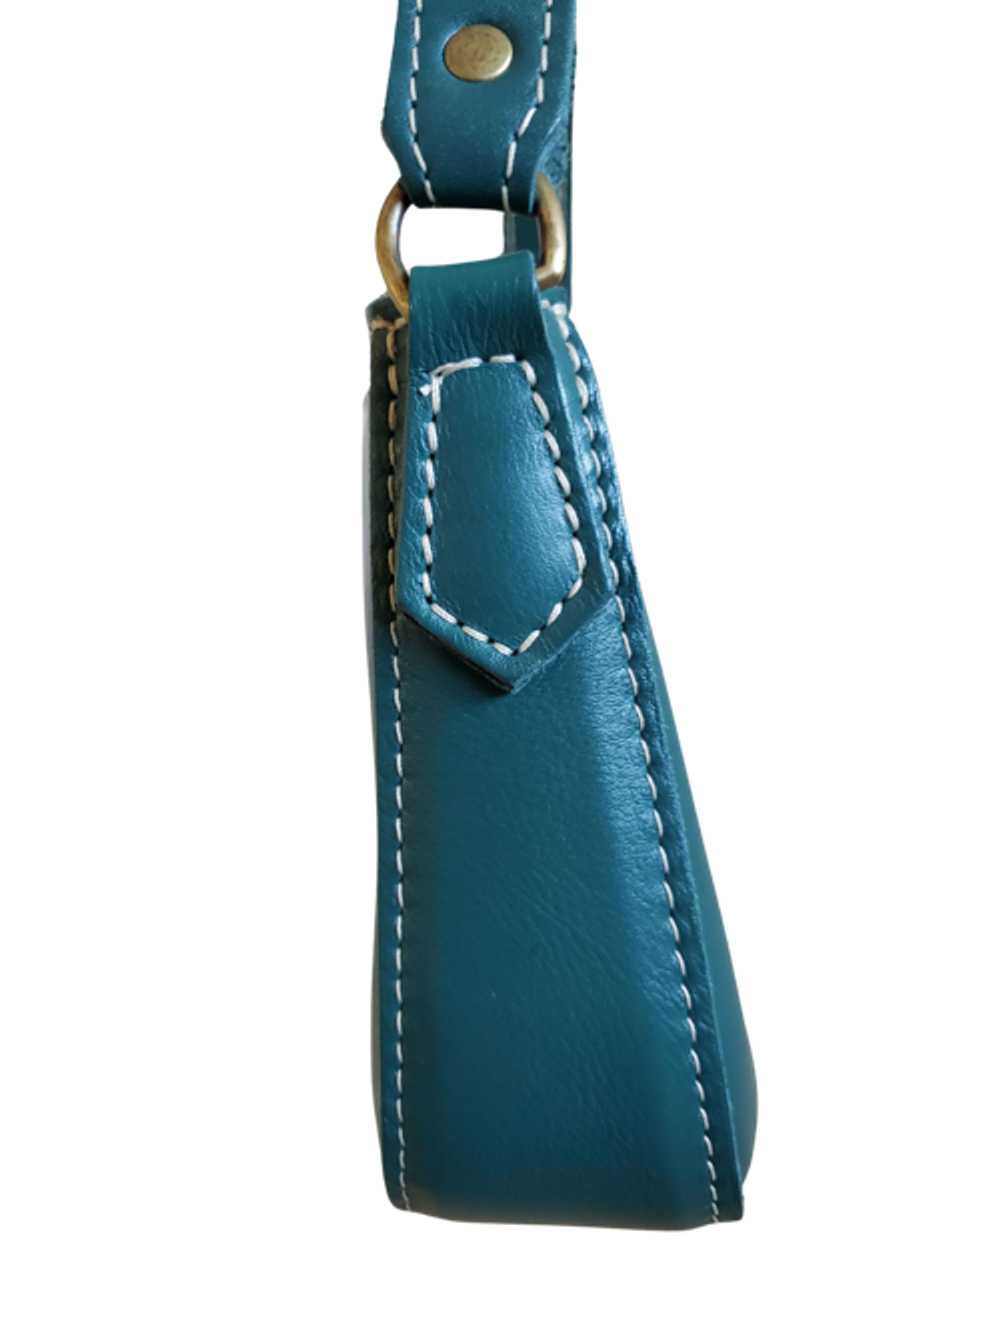 Portland Leather Premium Lucy Baguette in Peacock - image 3